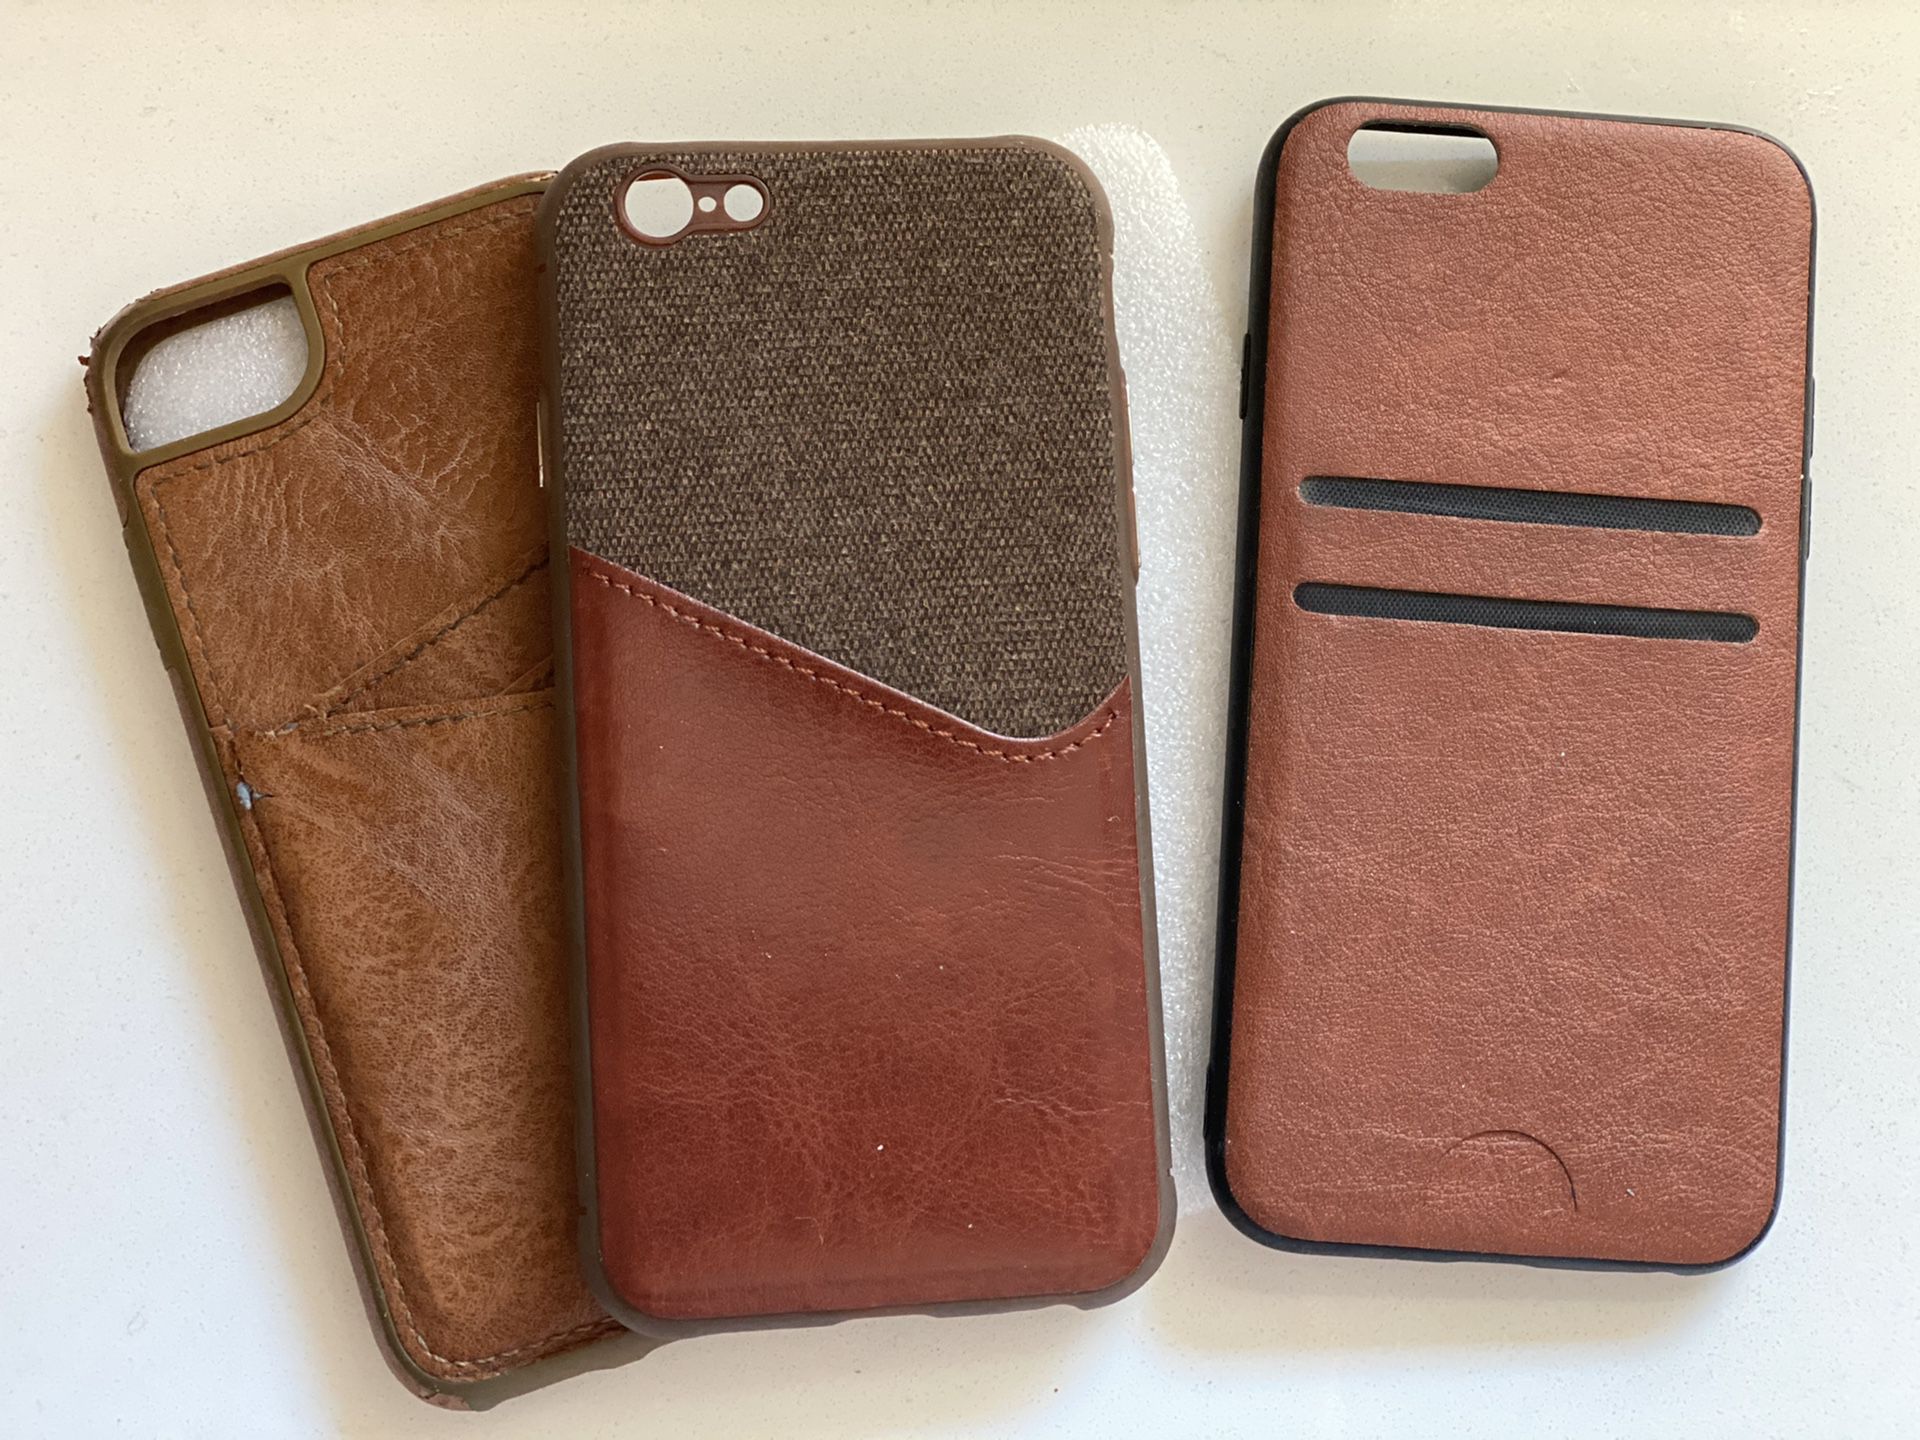 iPhone 6 leather cases (valet)